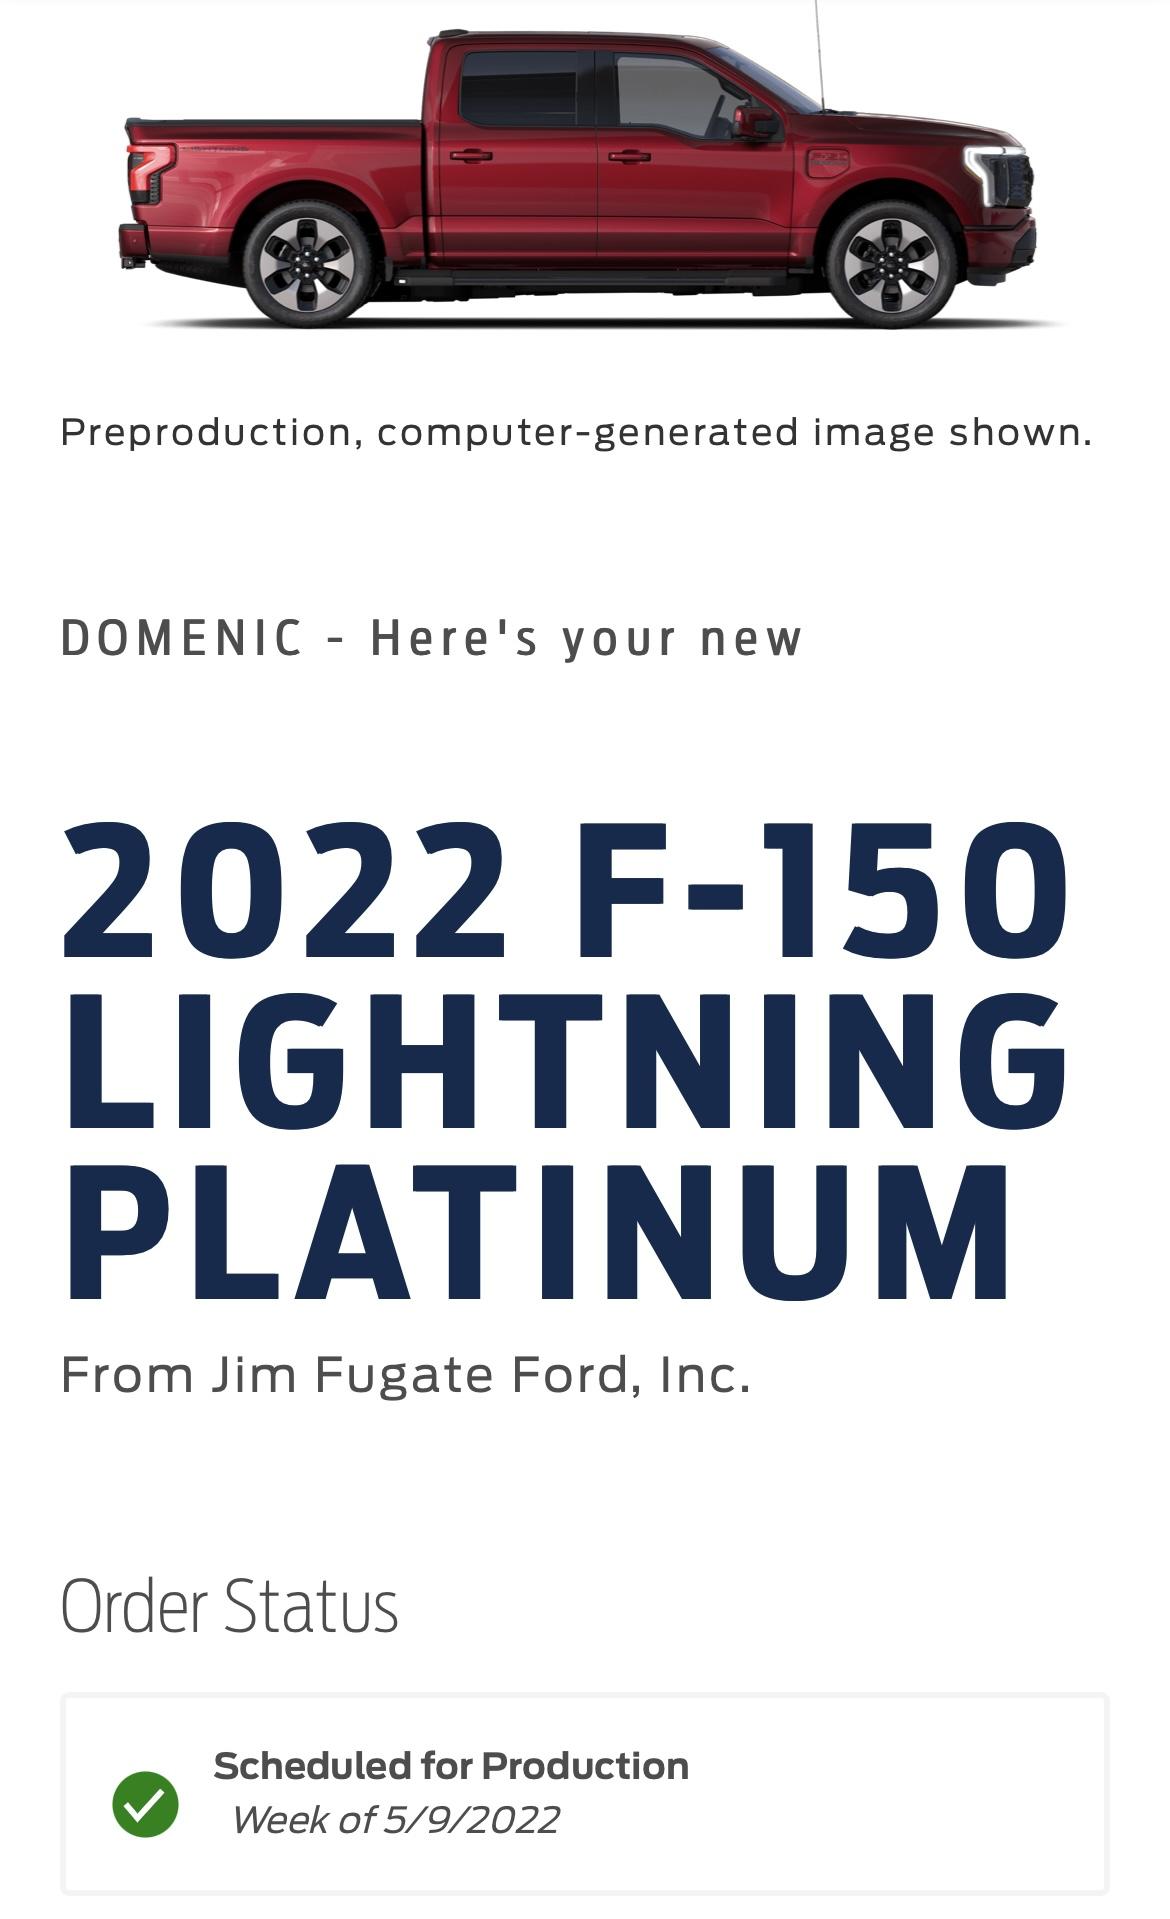 Ford F-150 Lightning UPDATE: Lightning Build Date Scheduling Begins! Mine for the week of 4/25/22 [previously scheduled 5/2/22]! E33CC8F1-67FC-4BA4-AE75-E60AFC69504B